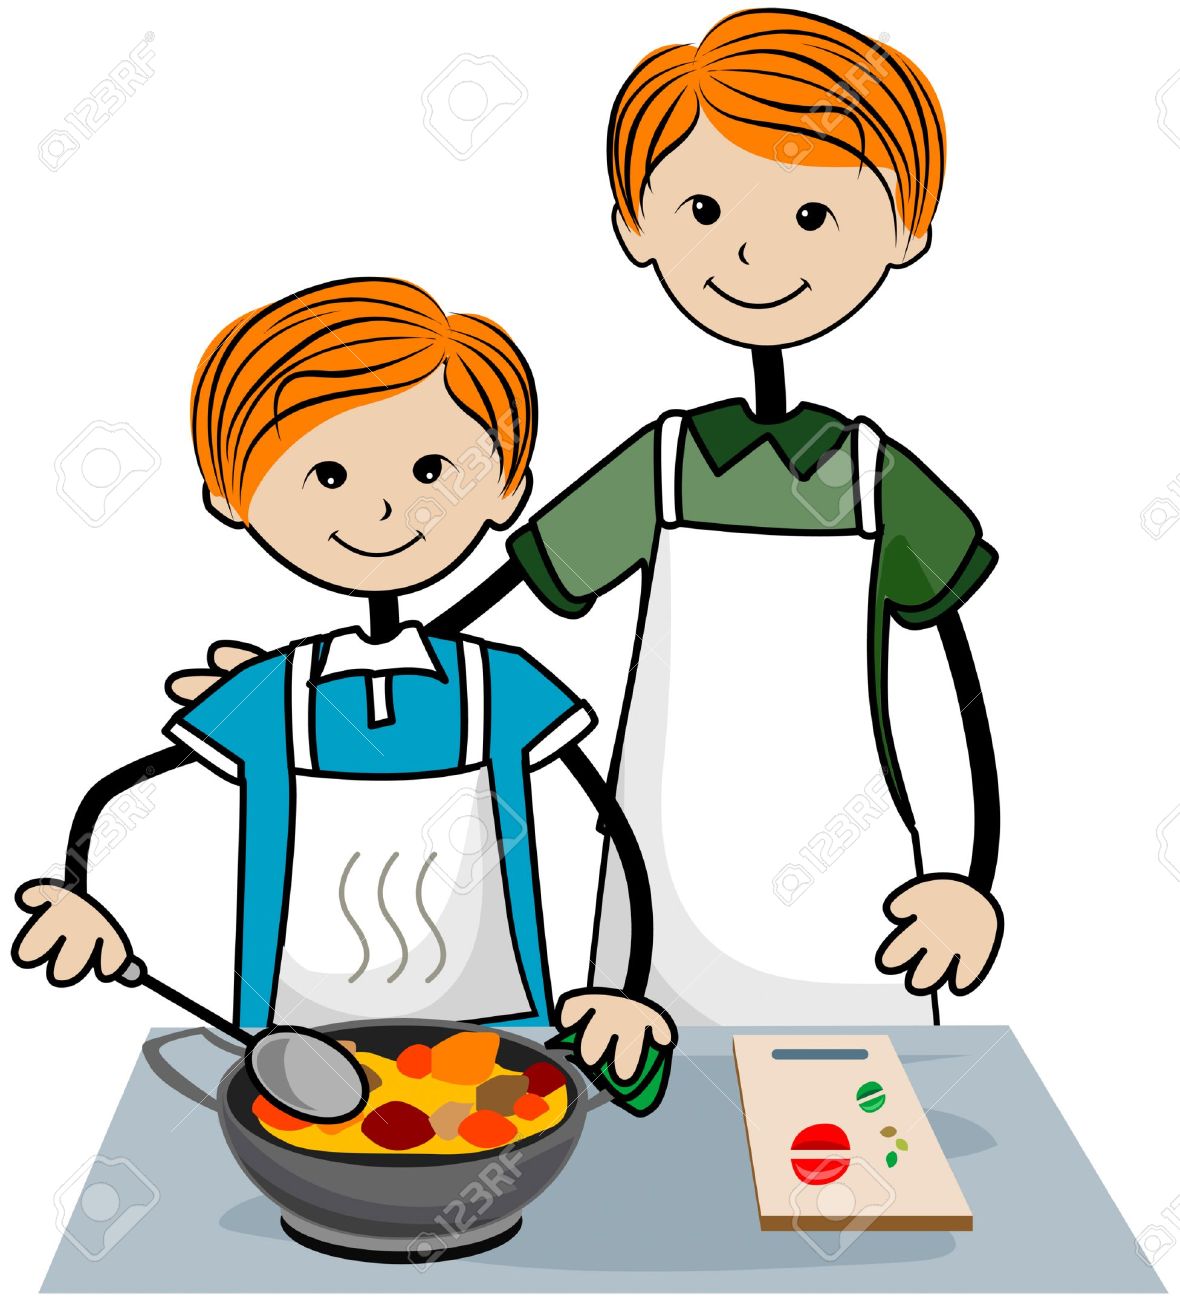 clipart cooking images - photo #16